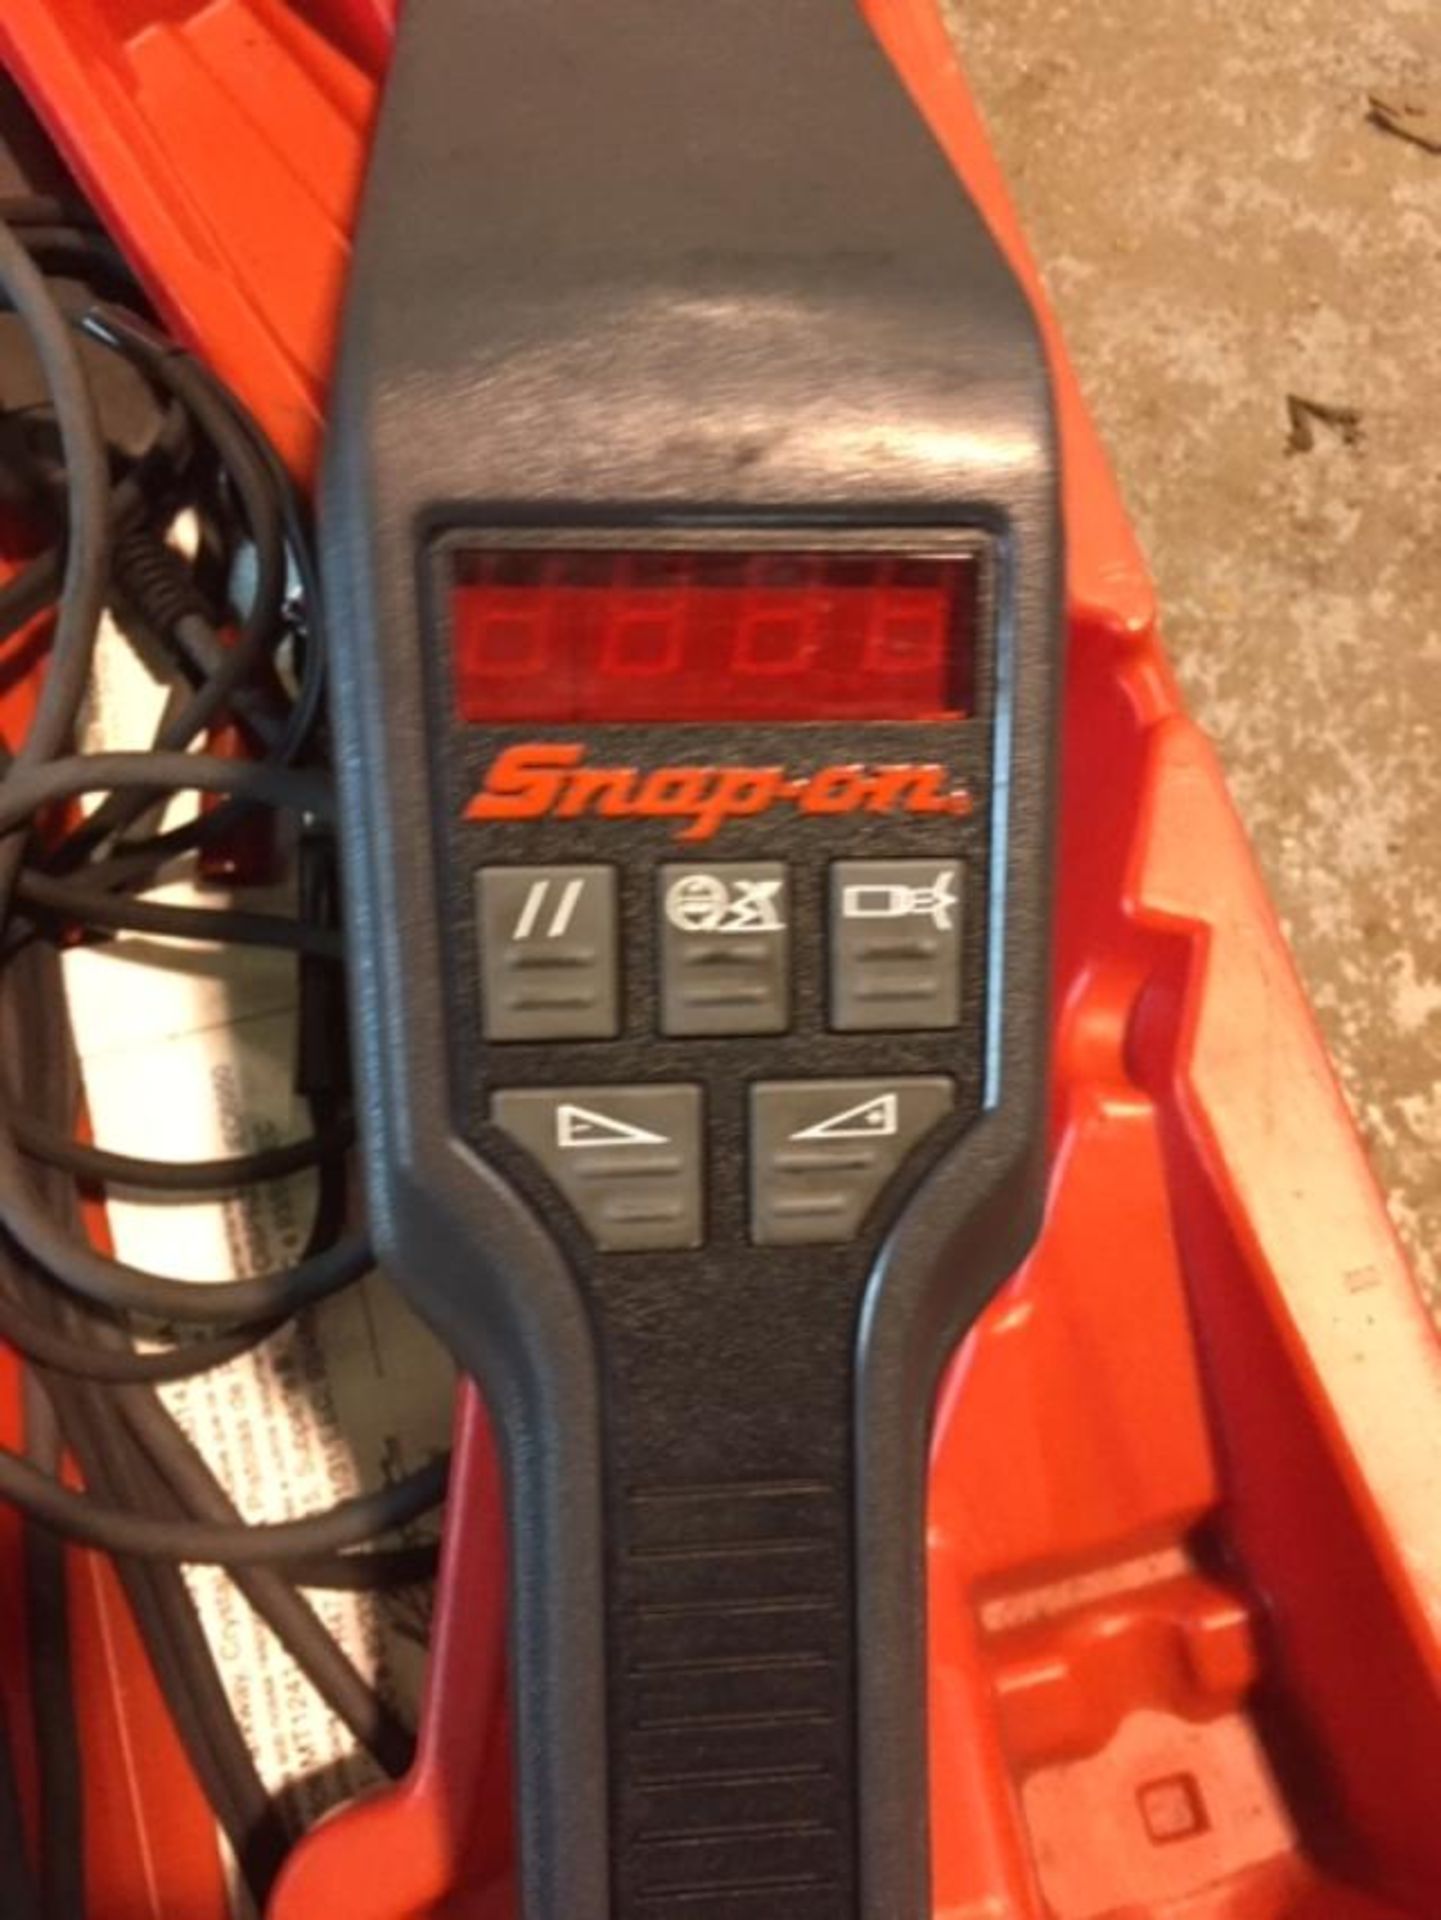 Snap On timing light needs new bulb - Image 2 of 4